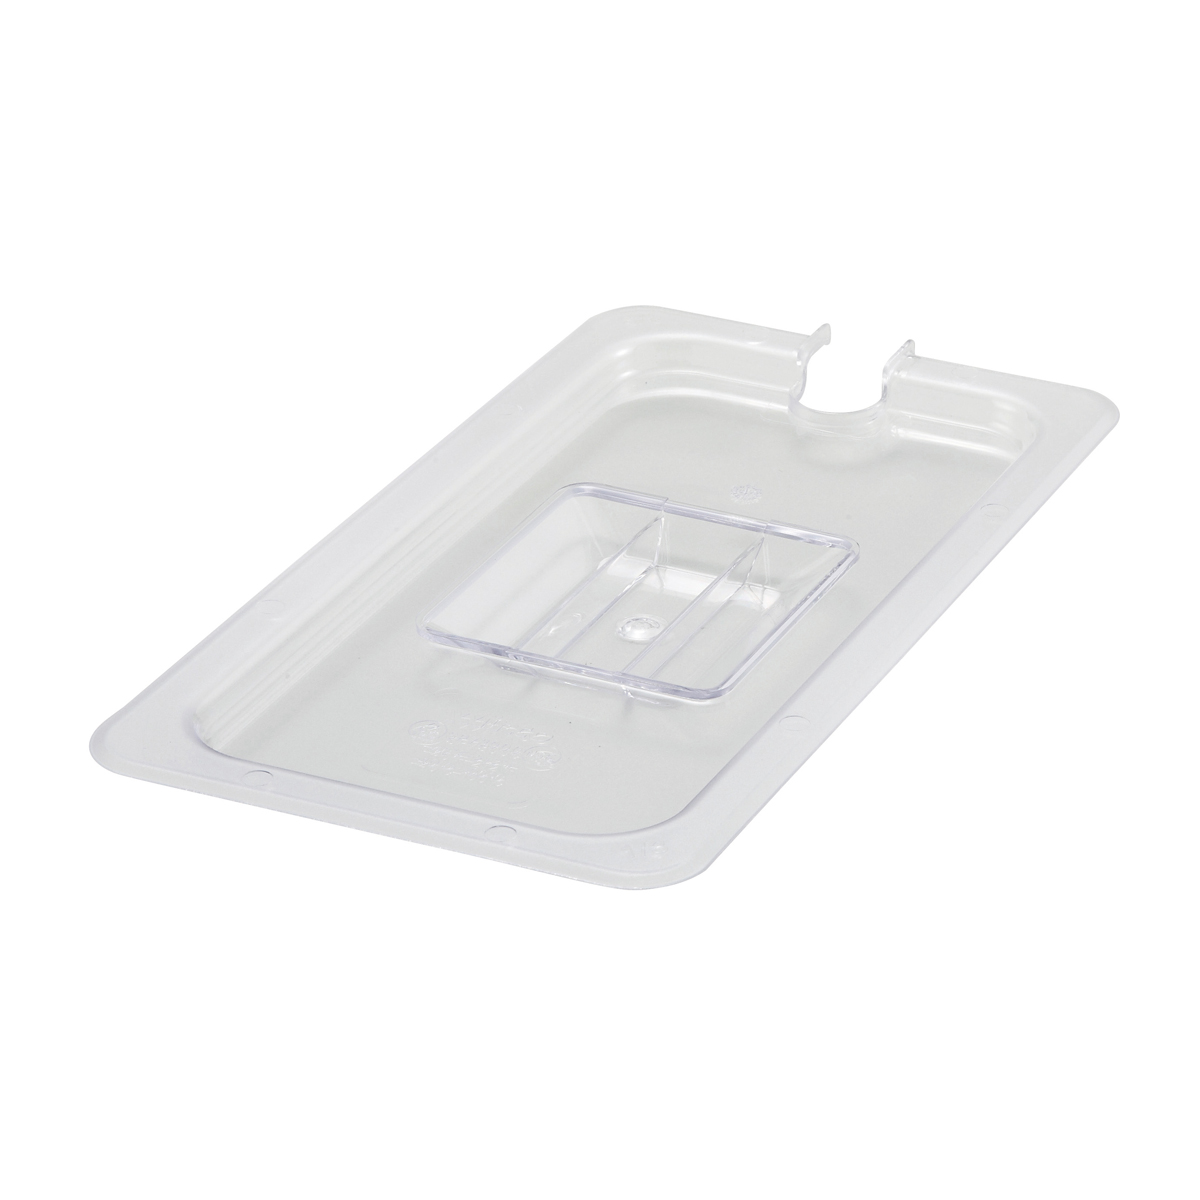 Winco SP7300C 1/3 Size Poly Ware Polycarbonate Food Pan Cover with Handle, Slotted